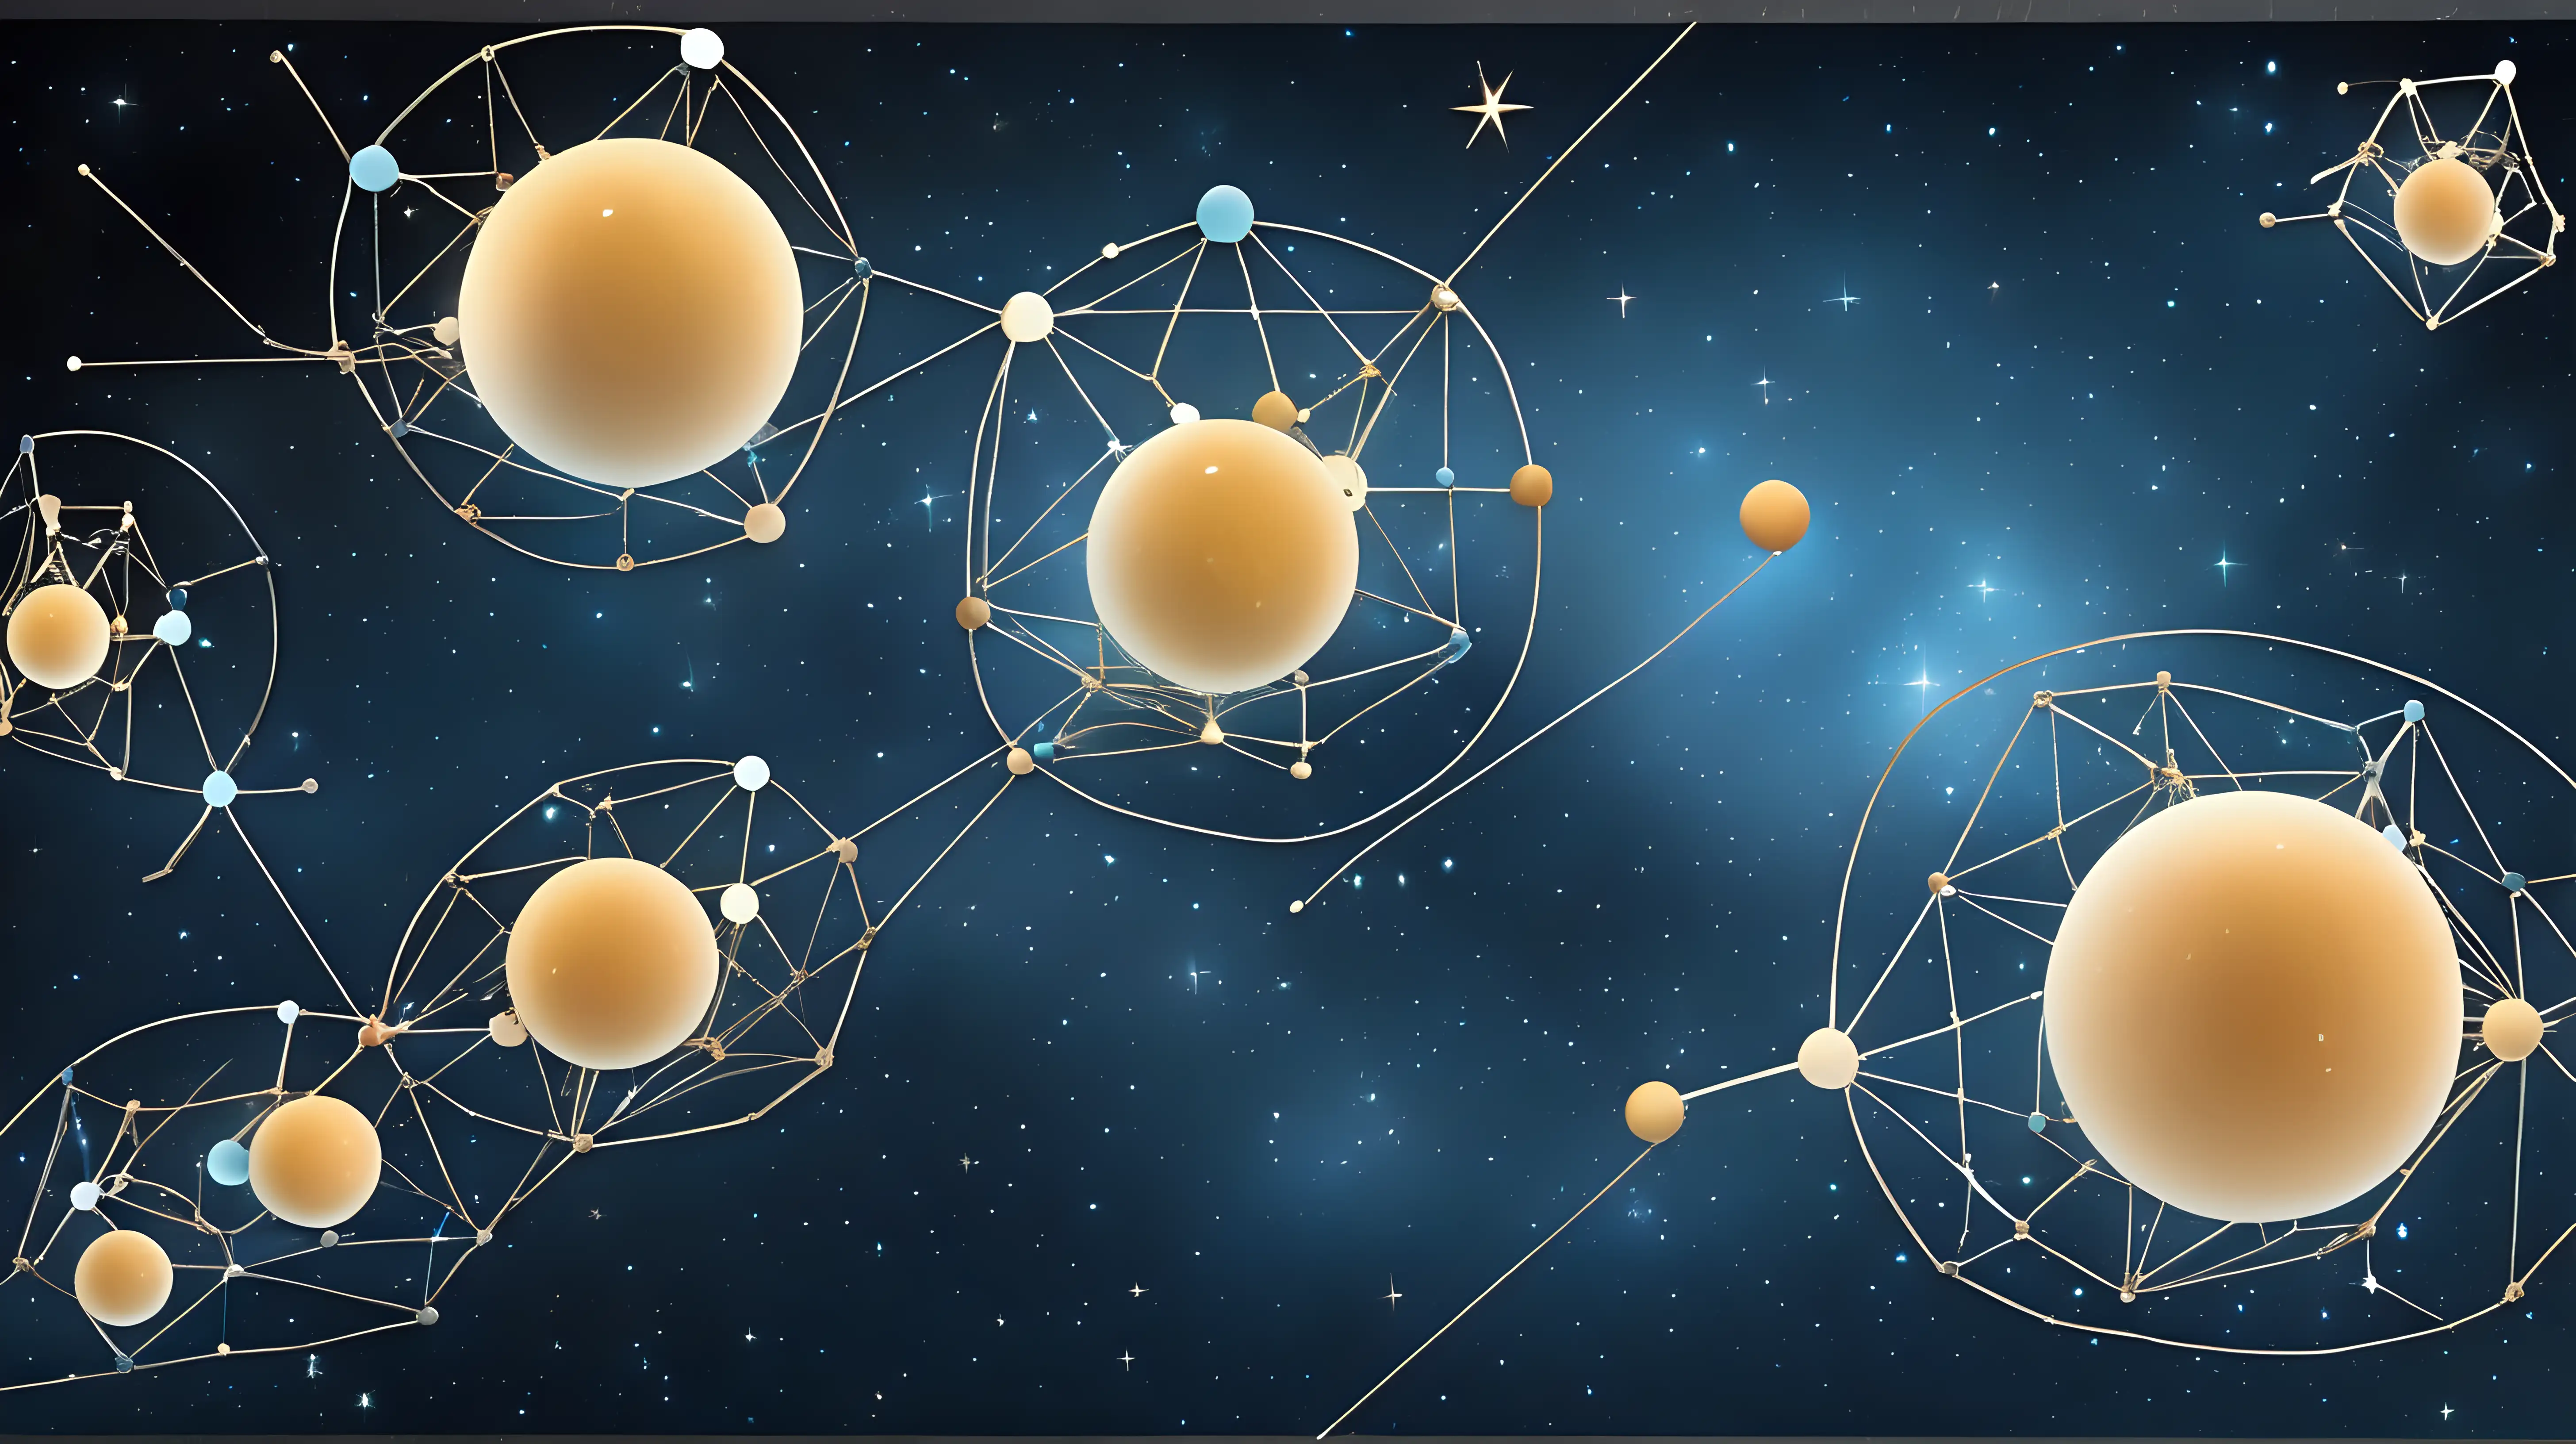 Celestial Spheres Arranged in Abstract Constellation